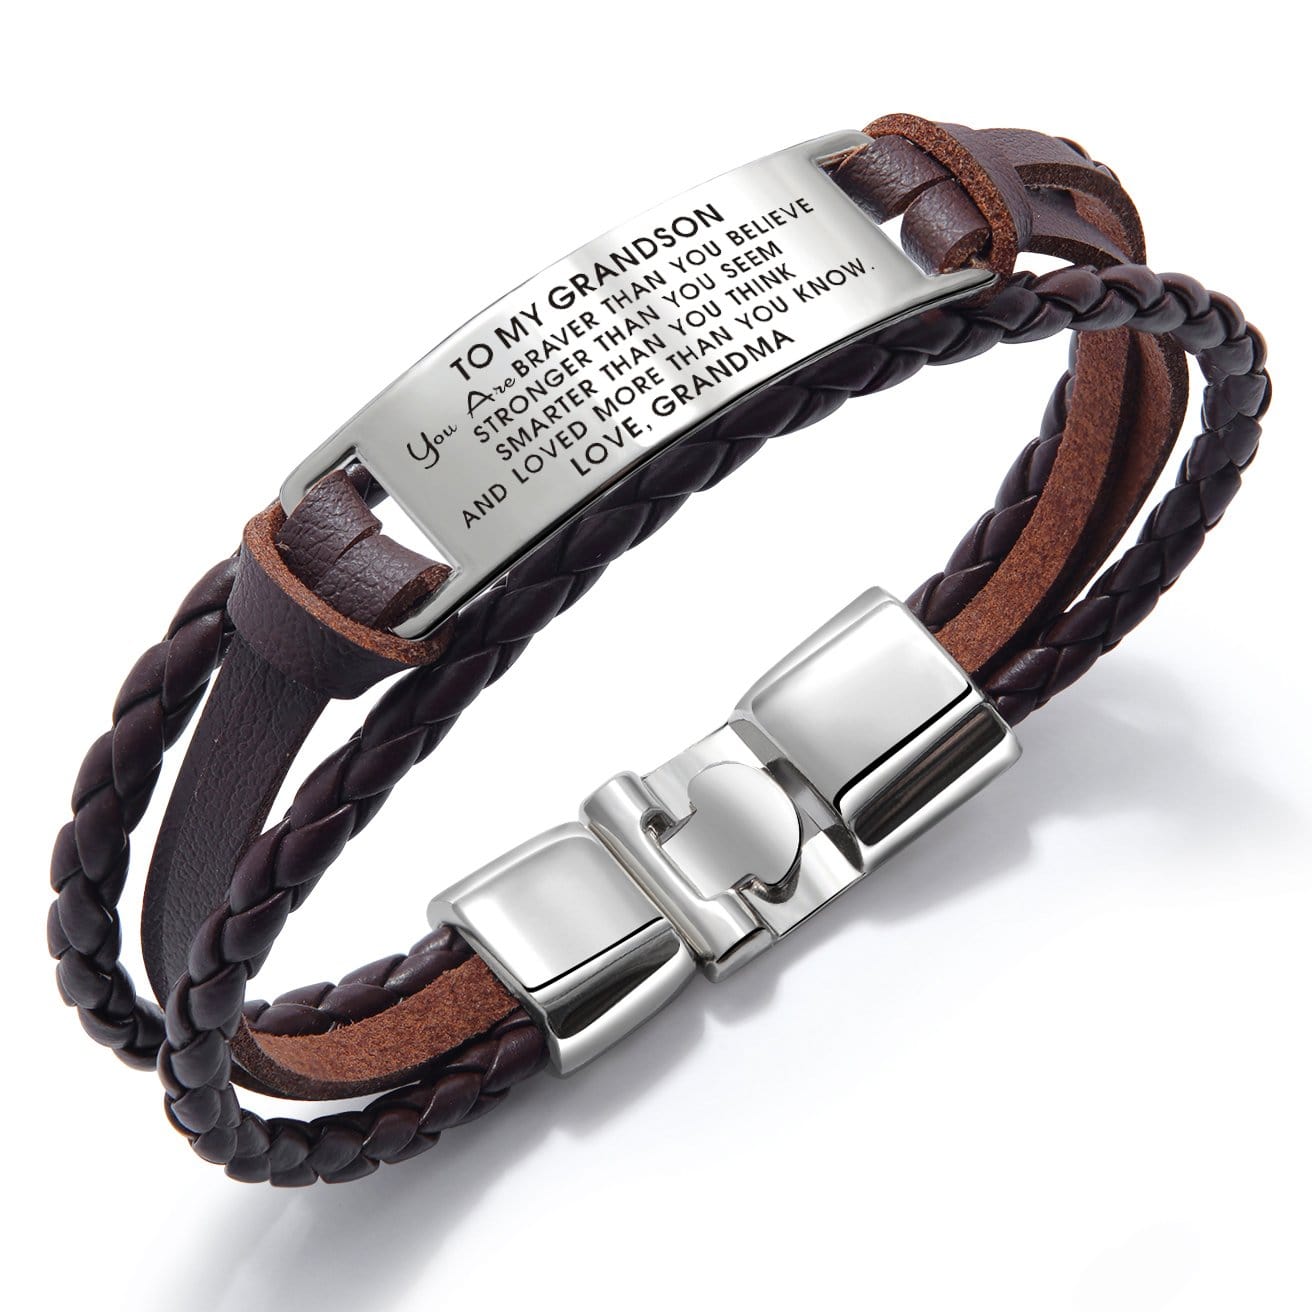 Bracelets Grandma To Grandson - You Are Loved More Than You Know Leather Bracelet Brown GiveMe-Gifts